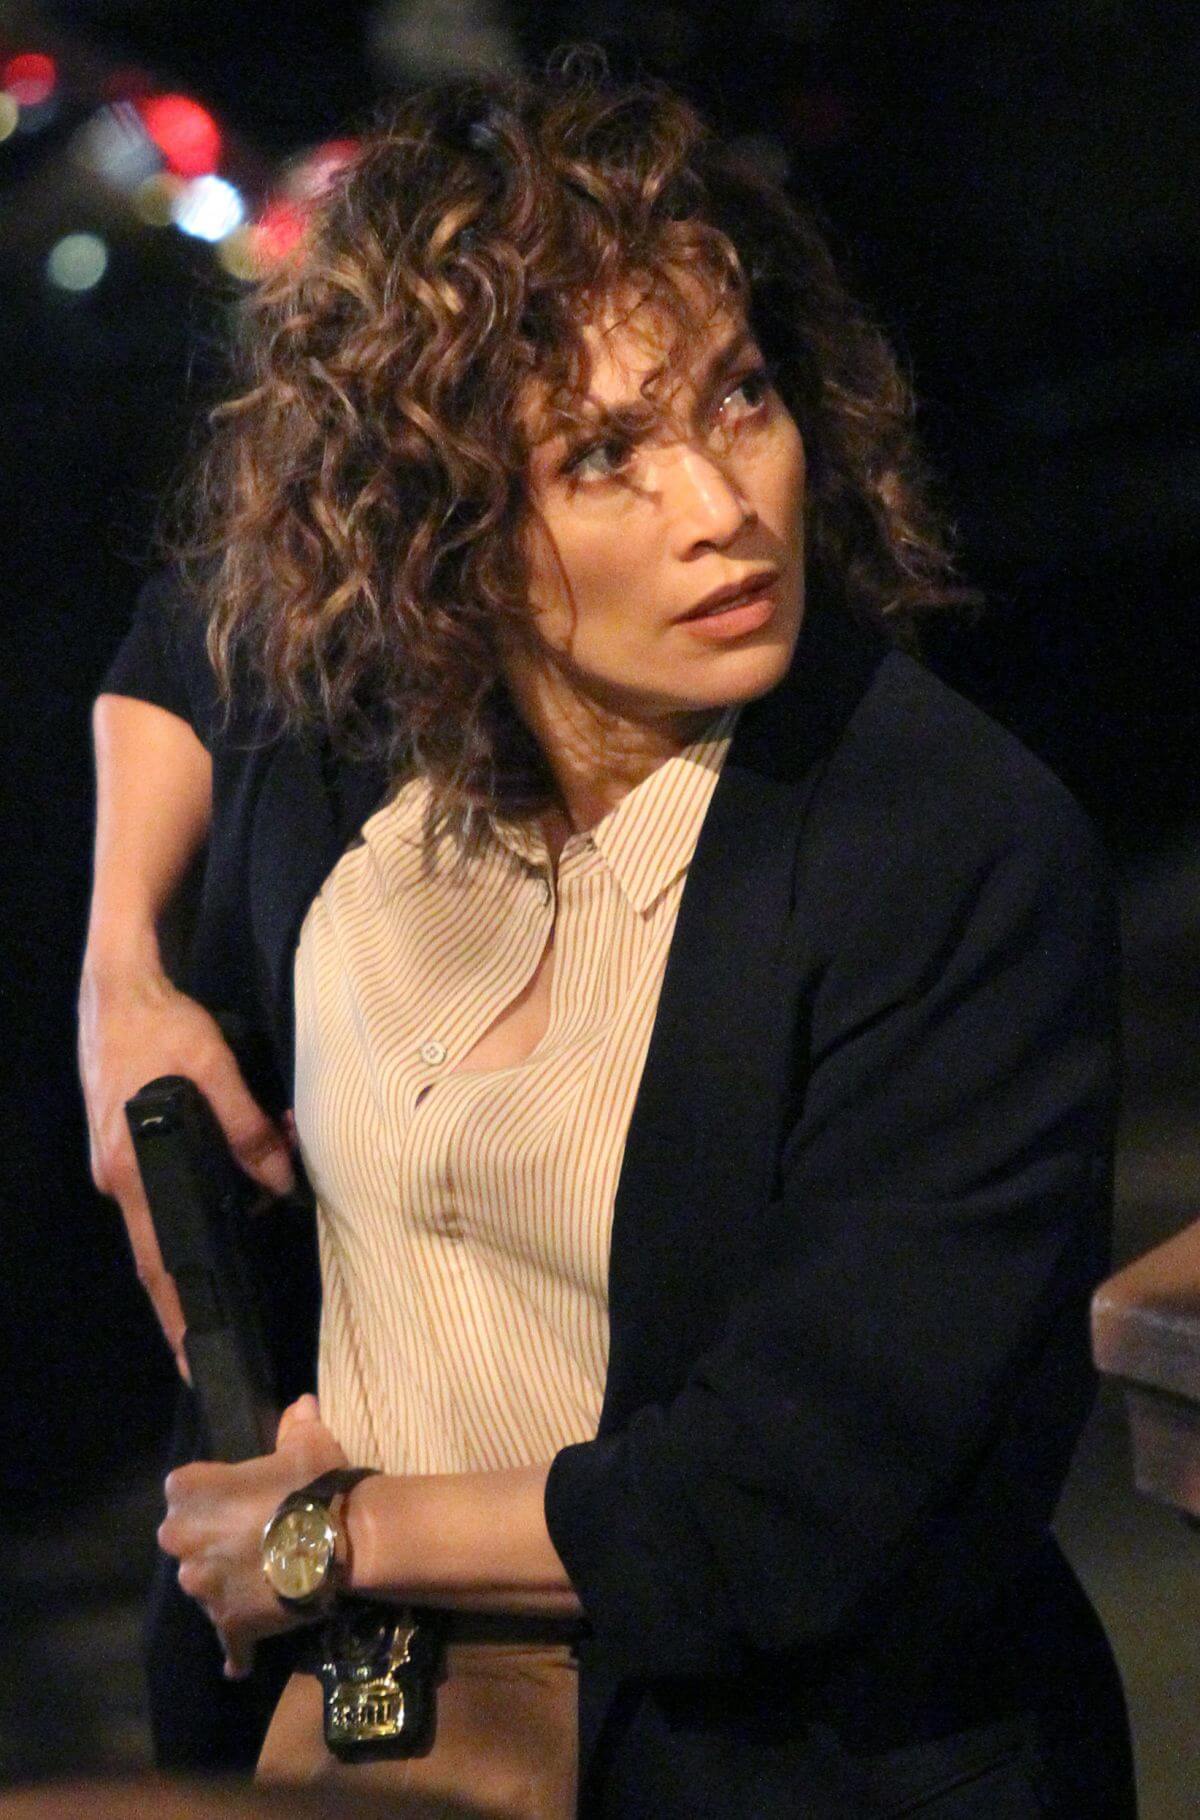 Jennifer Lopez on the Set of Shades of Blue in New York